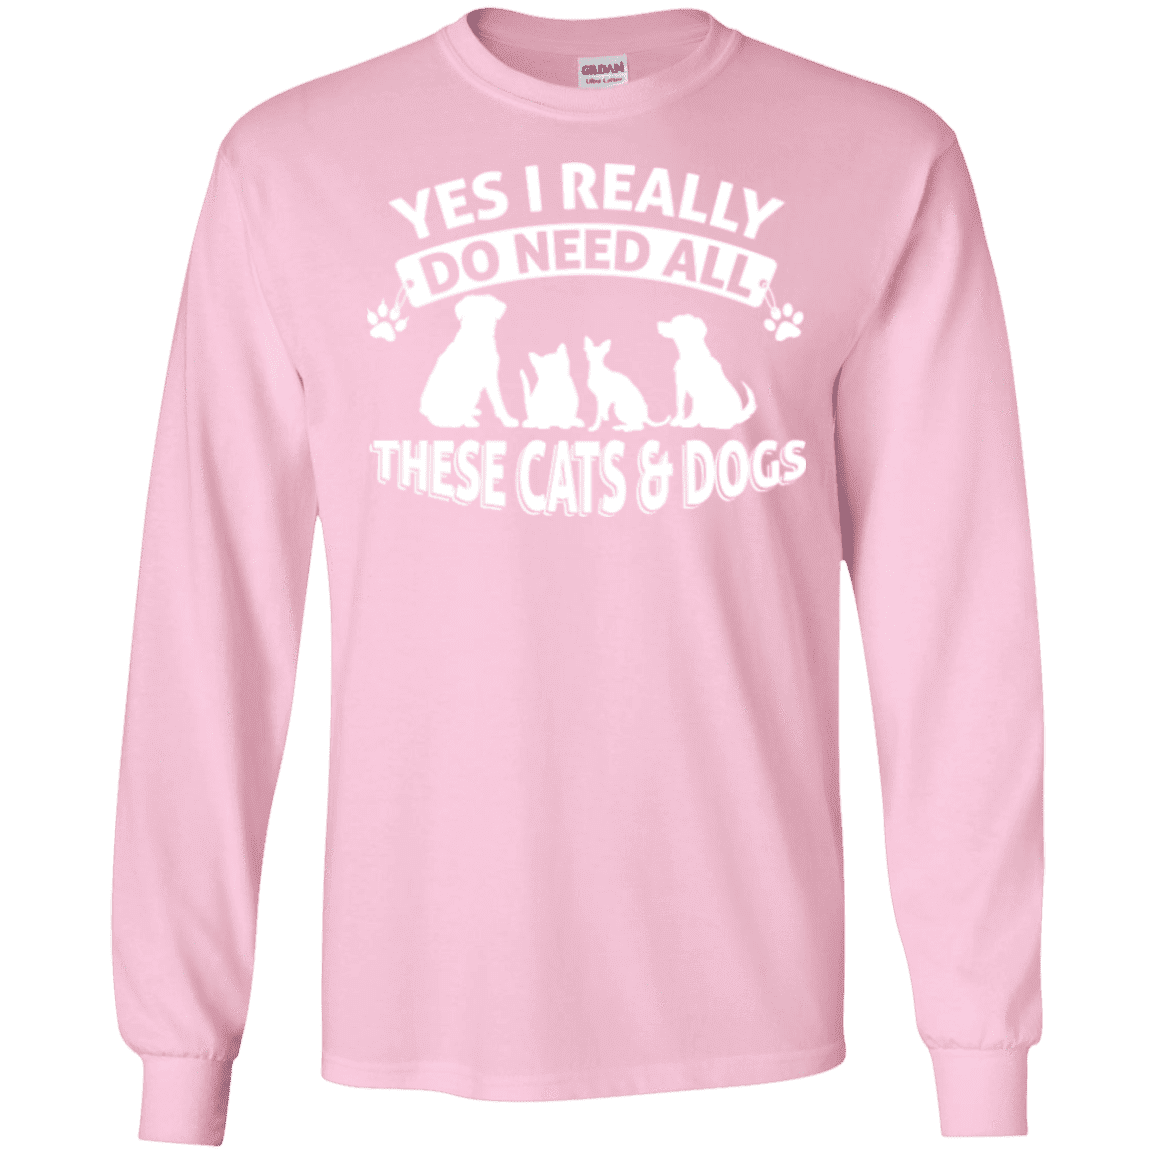 Yes I Need All These Cats and Dogs - Long Sleeve T Shirt.